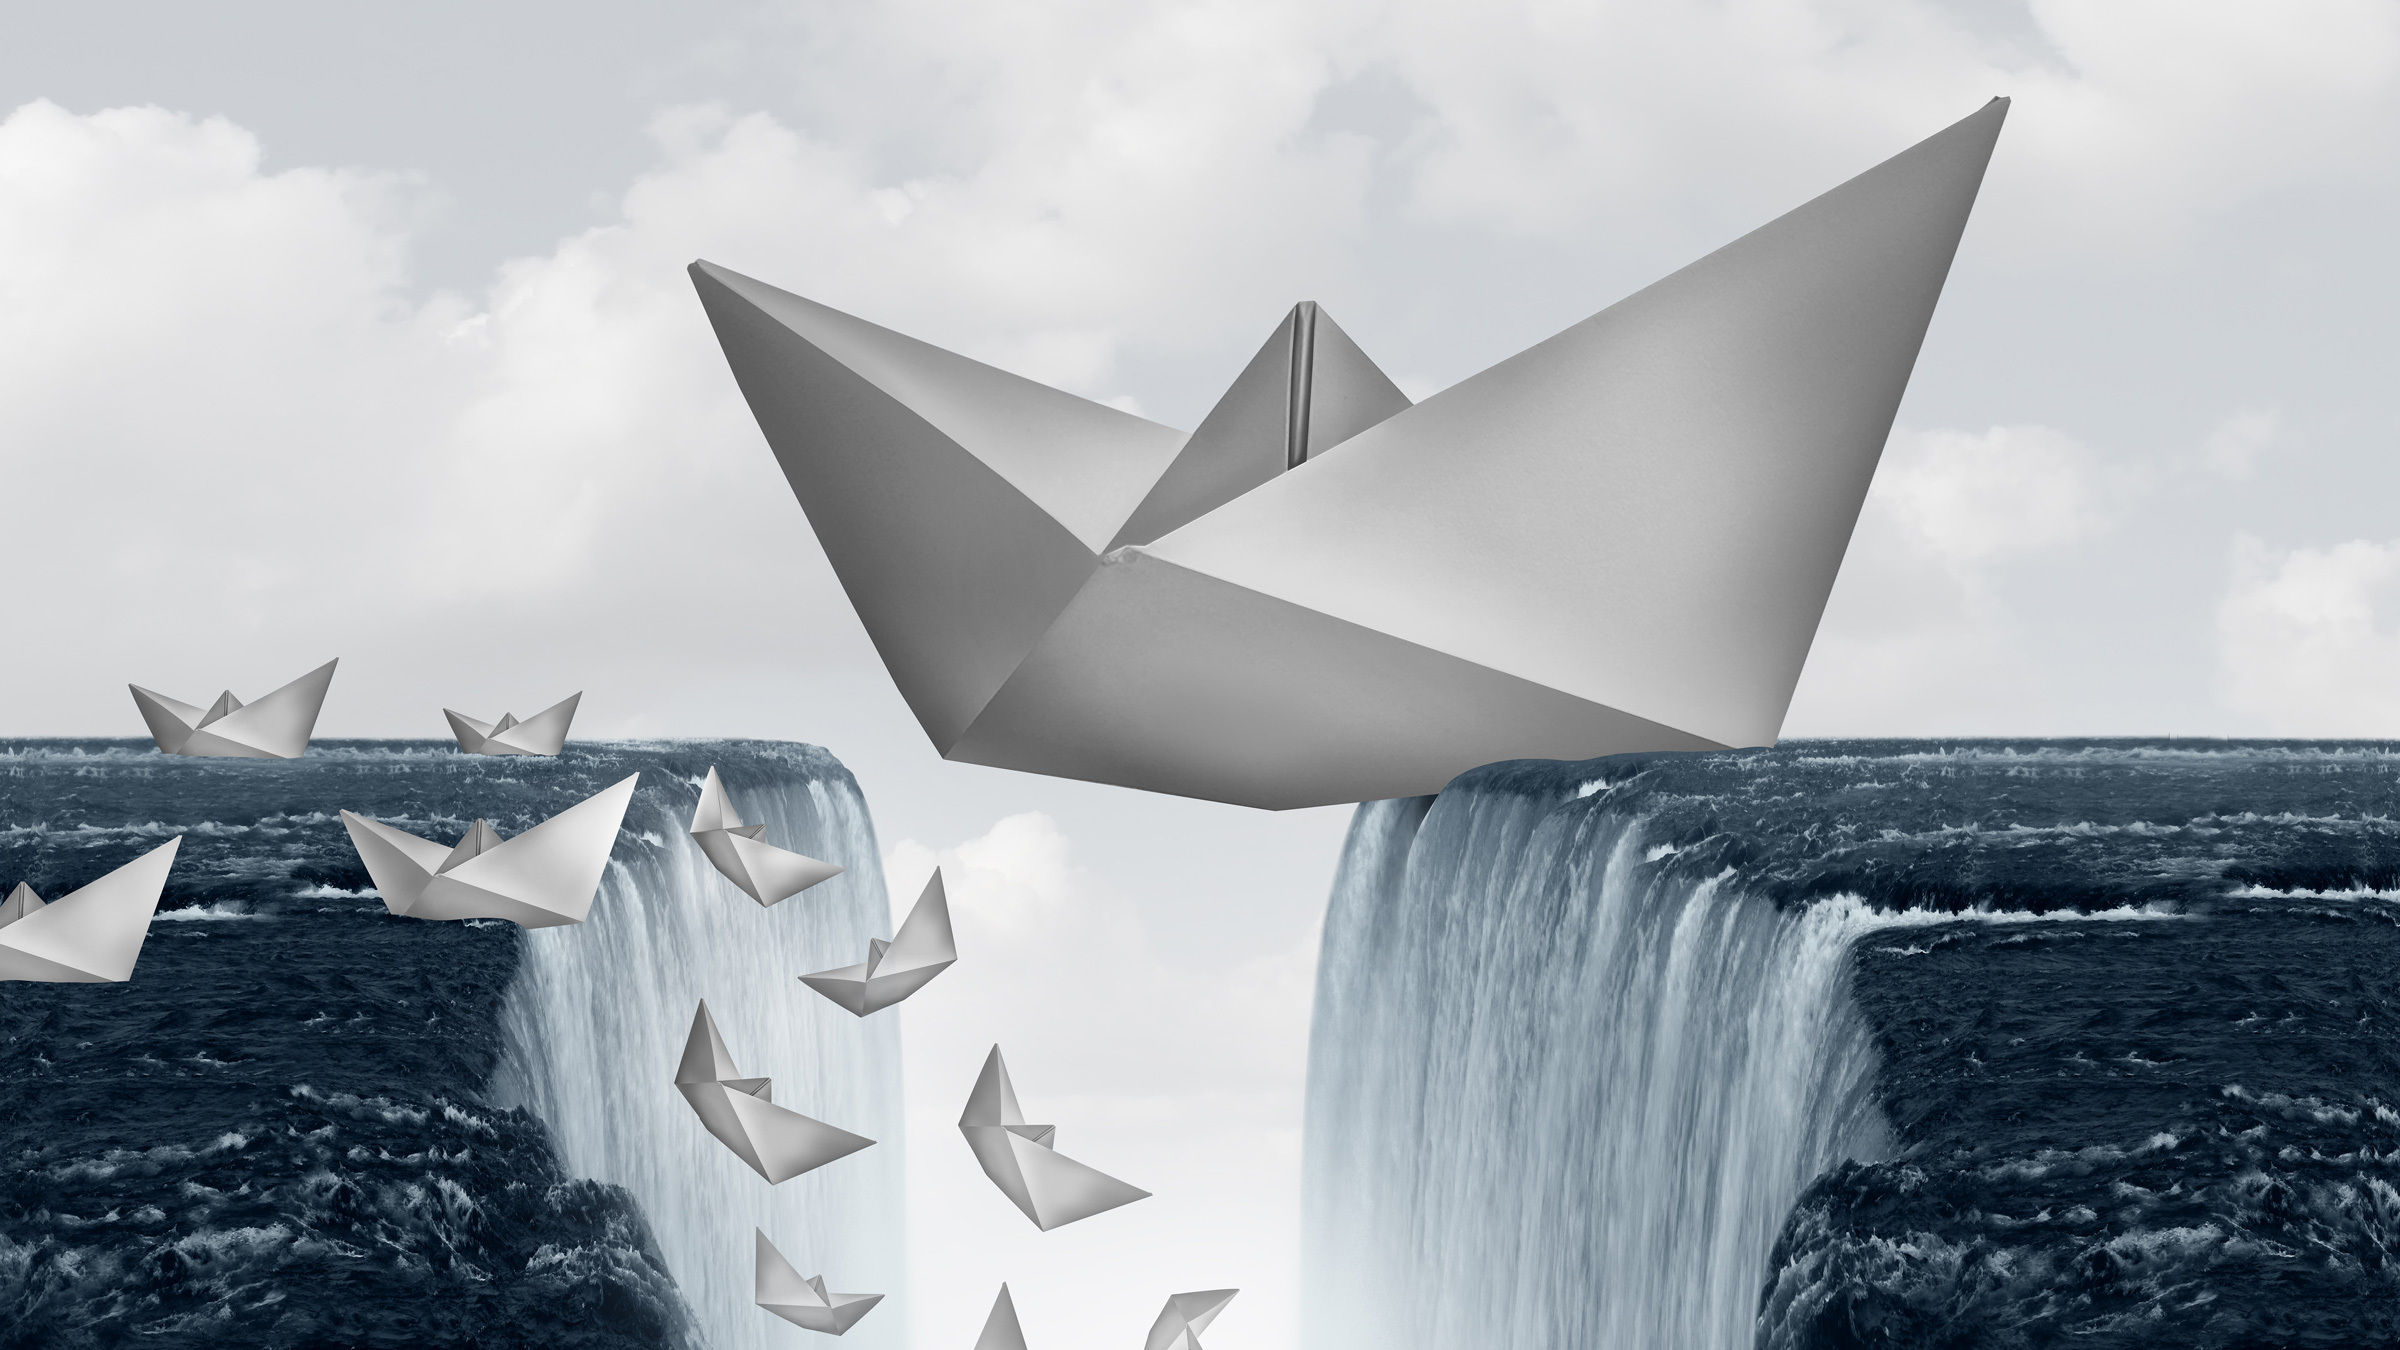 origami boats fall off a waterfall into a chasm, illustration